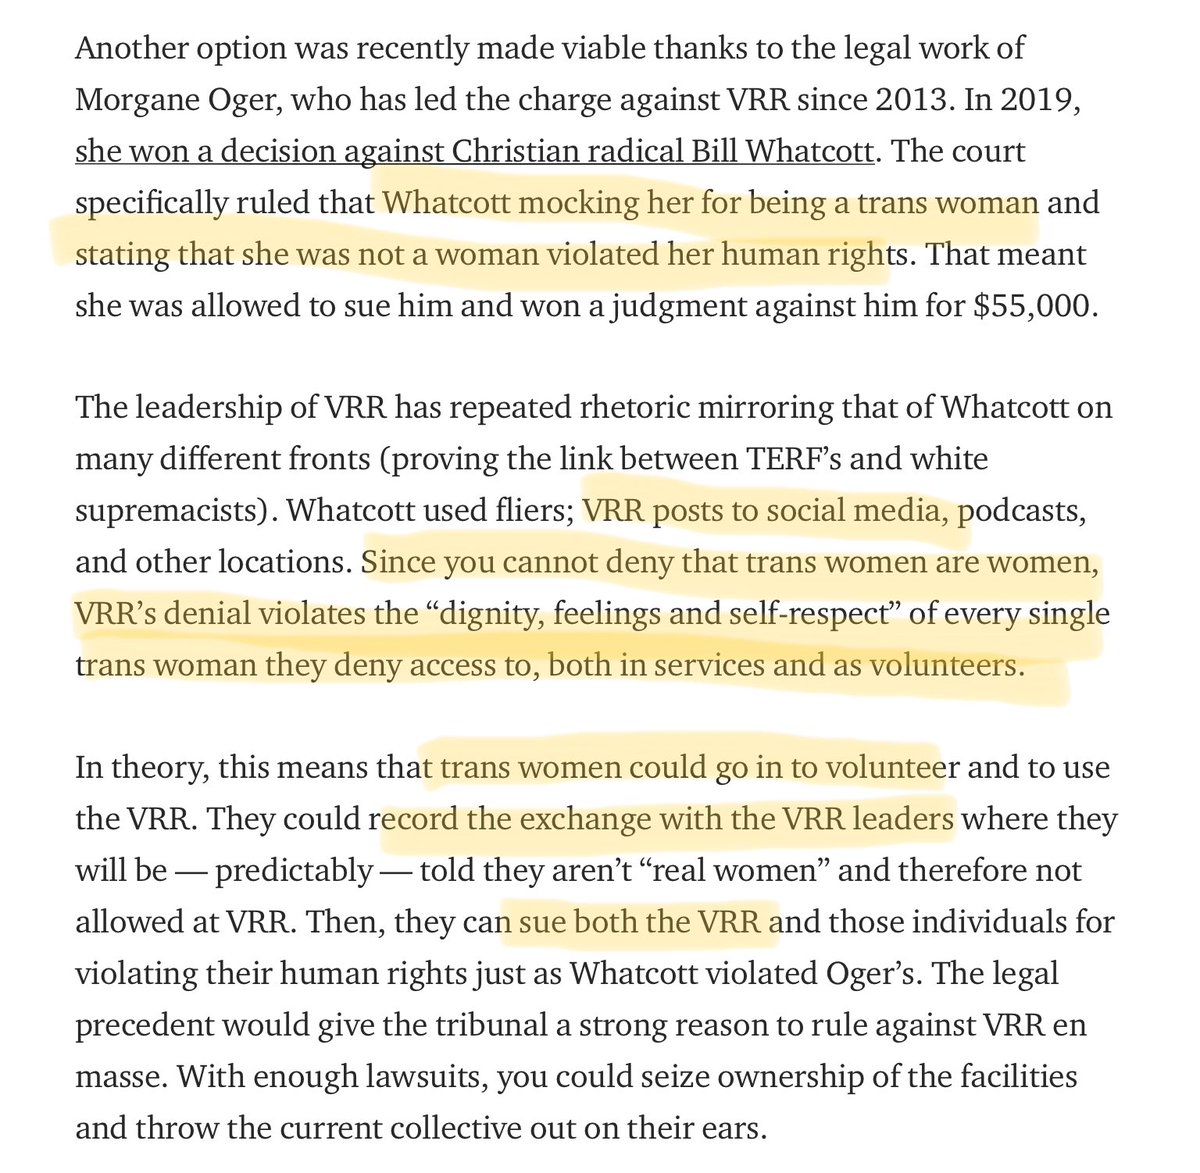 “VRR[] violates the ‘dignity, feelings and self-respect’ of every single trans woman they deny access to….”“[T]rans women could… record… exchange[s] with the VRR [telling them] they aren’t ‘real women’…. Then, they can sue… the VRR… for violating their human rights.”